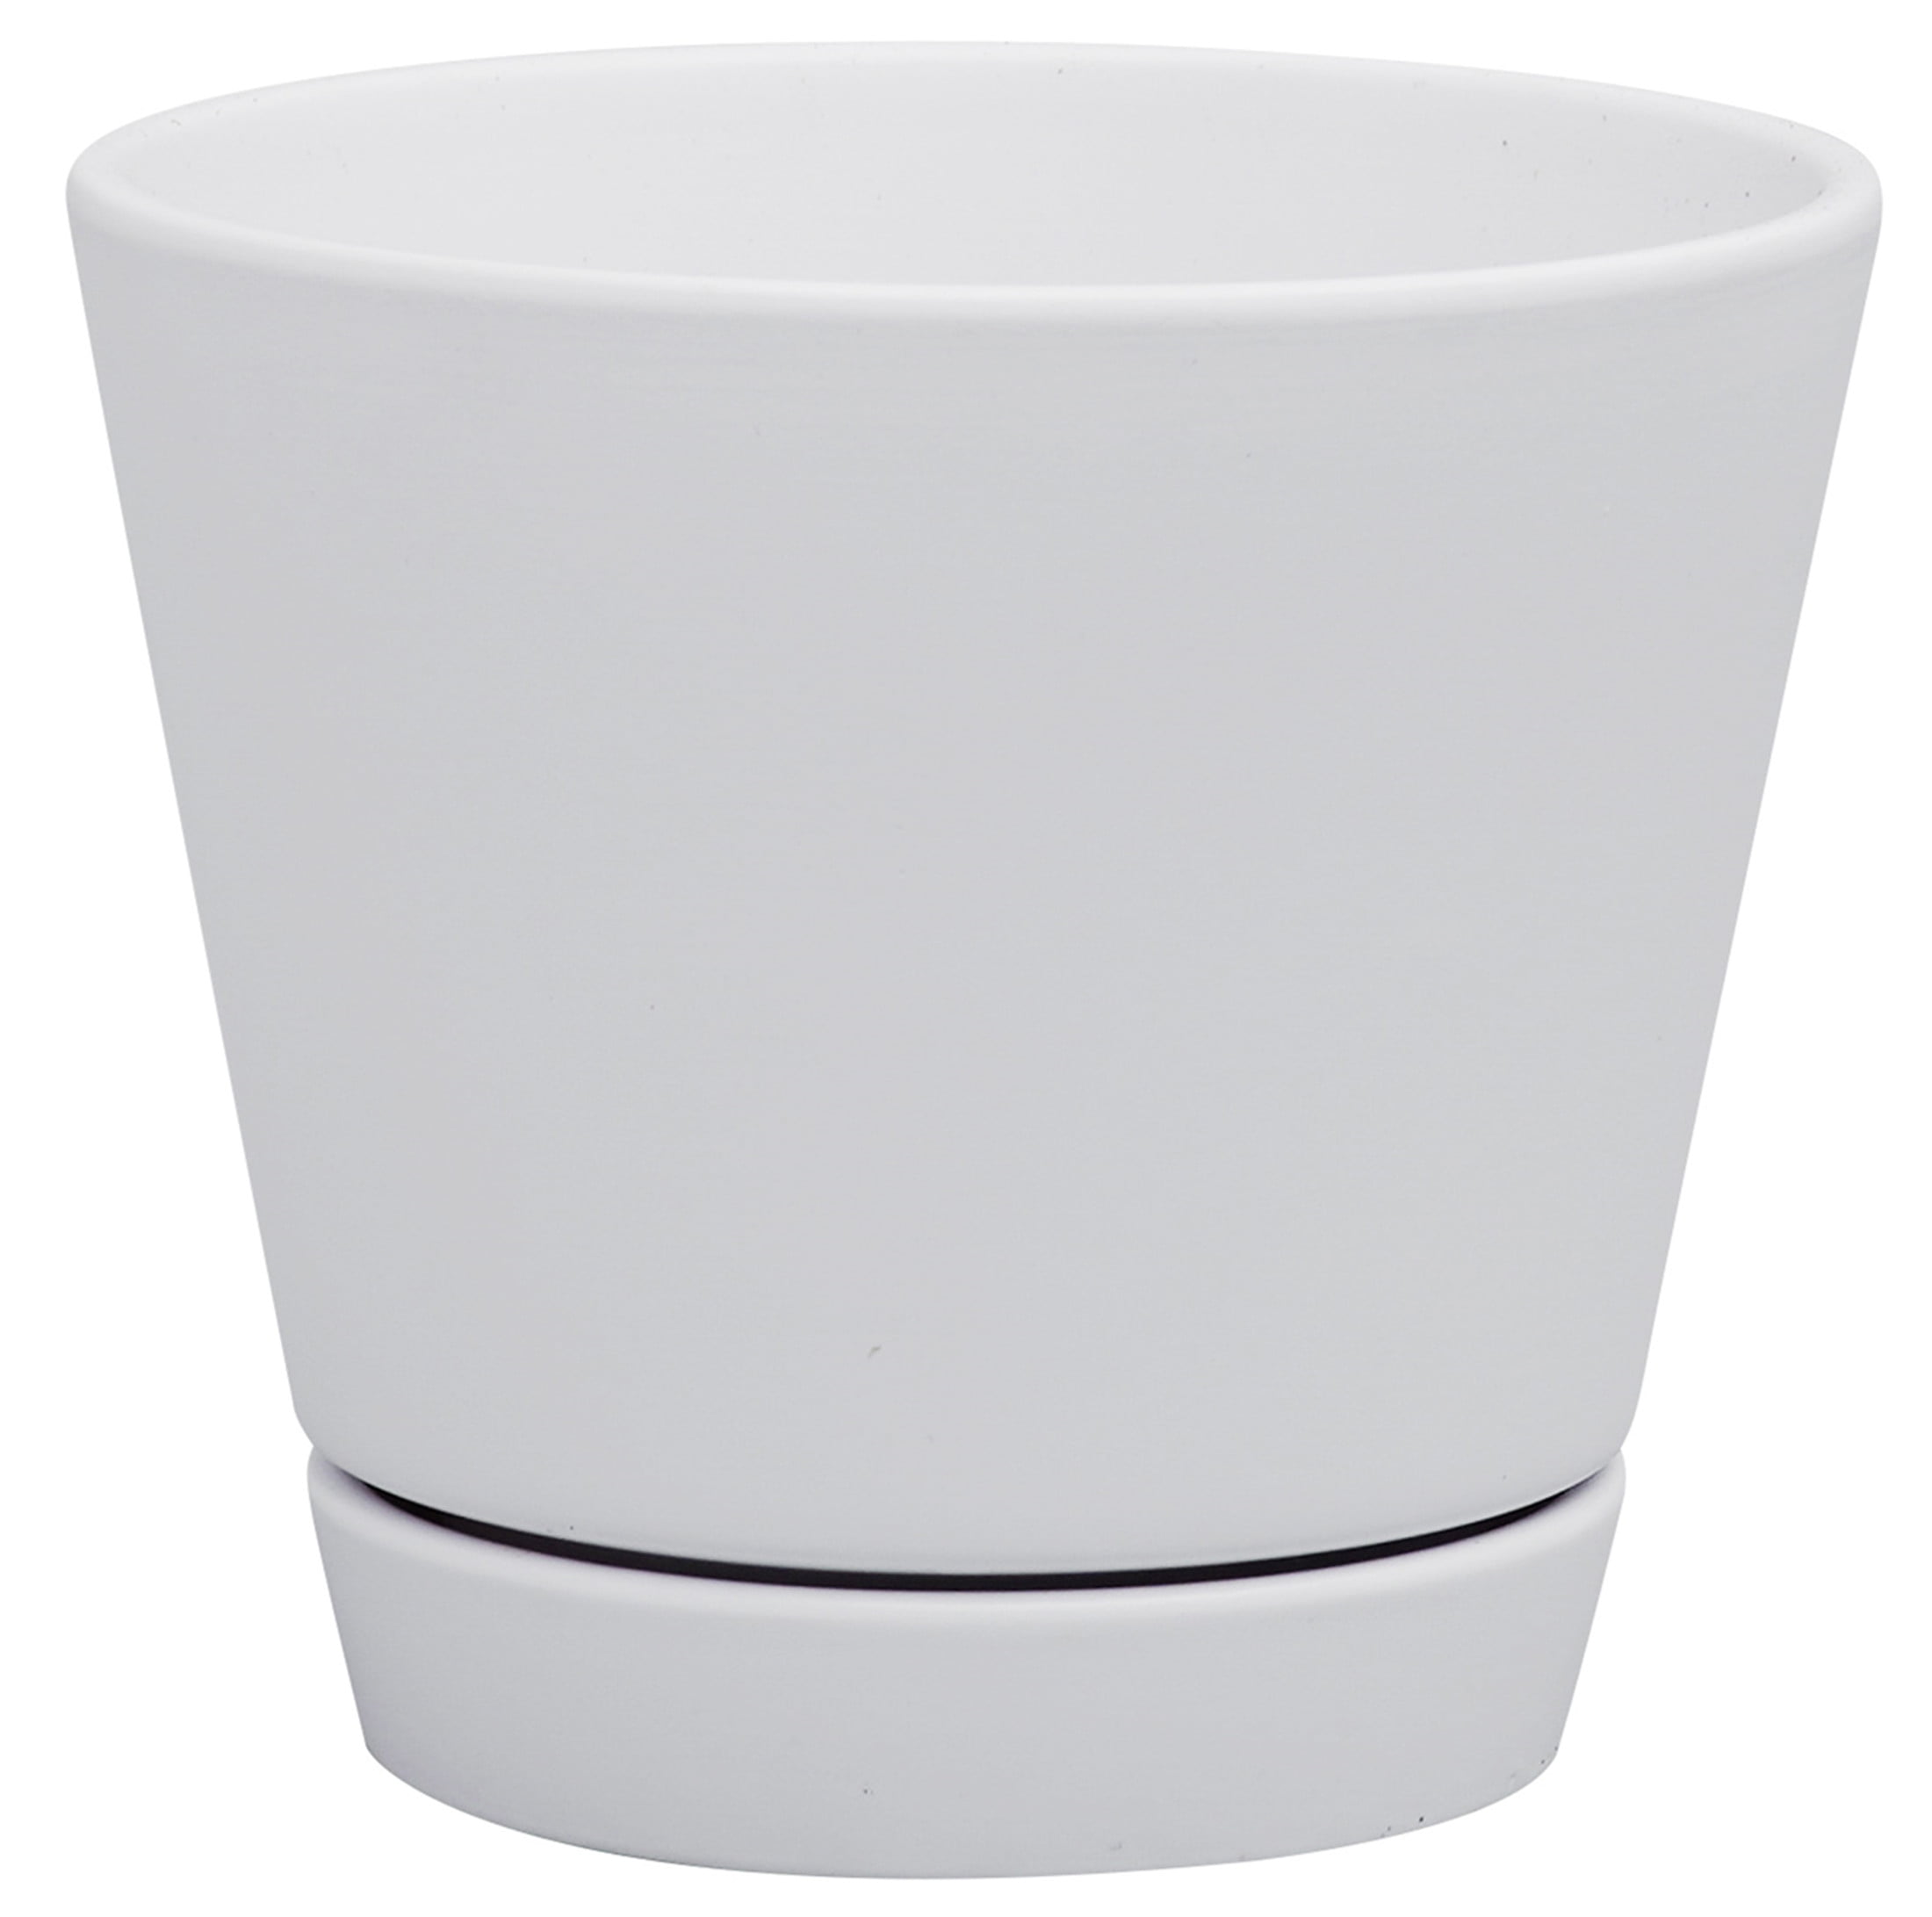 Mainstays Pottery 6" Matte White Ceramic Planter with Saucer